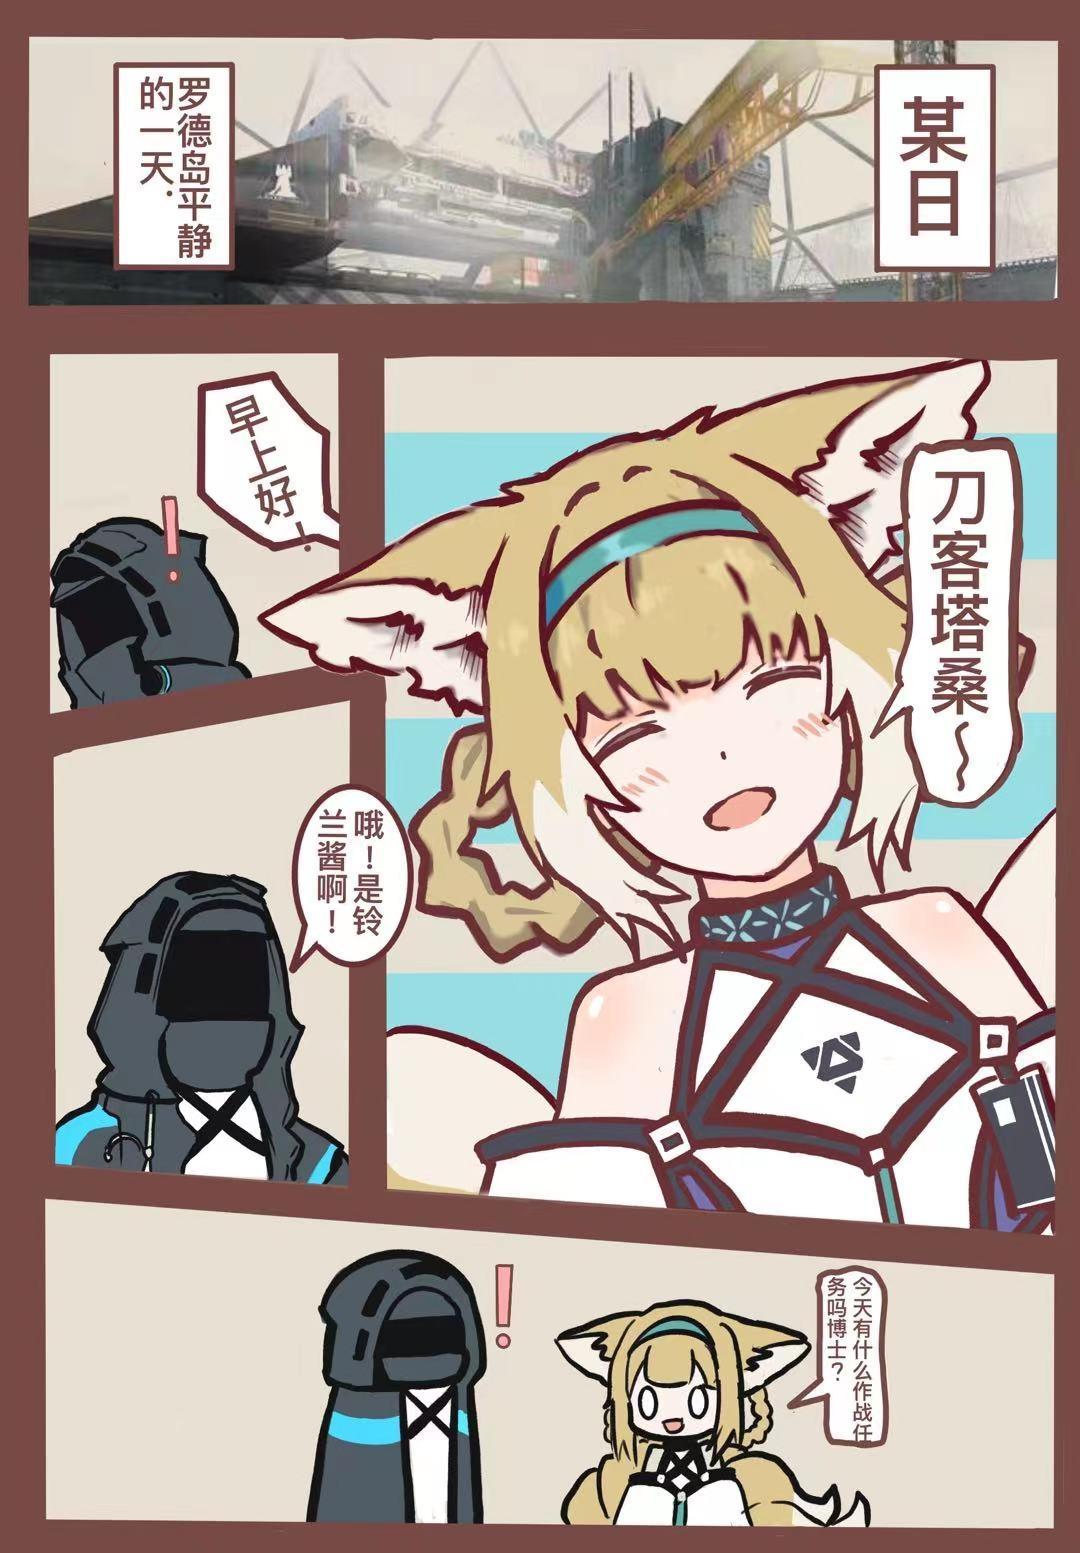 Punished 铃兰の单人作战记录 - Arknights Gayfuck - Page 2